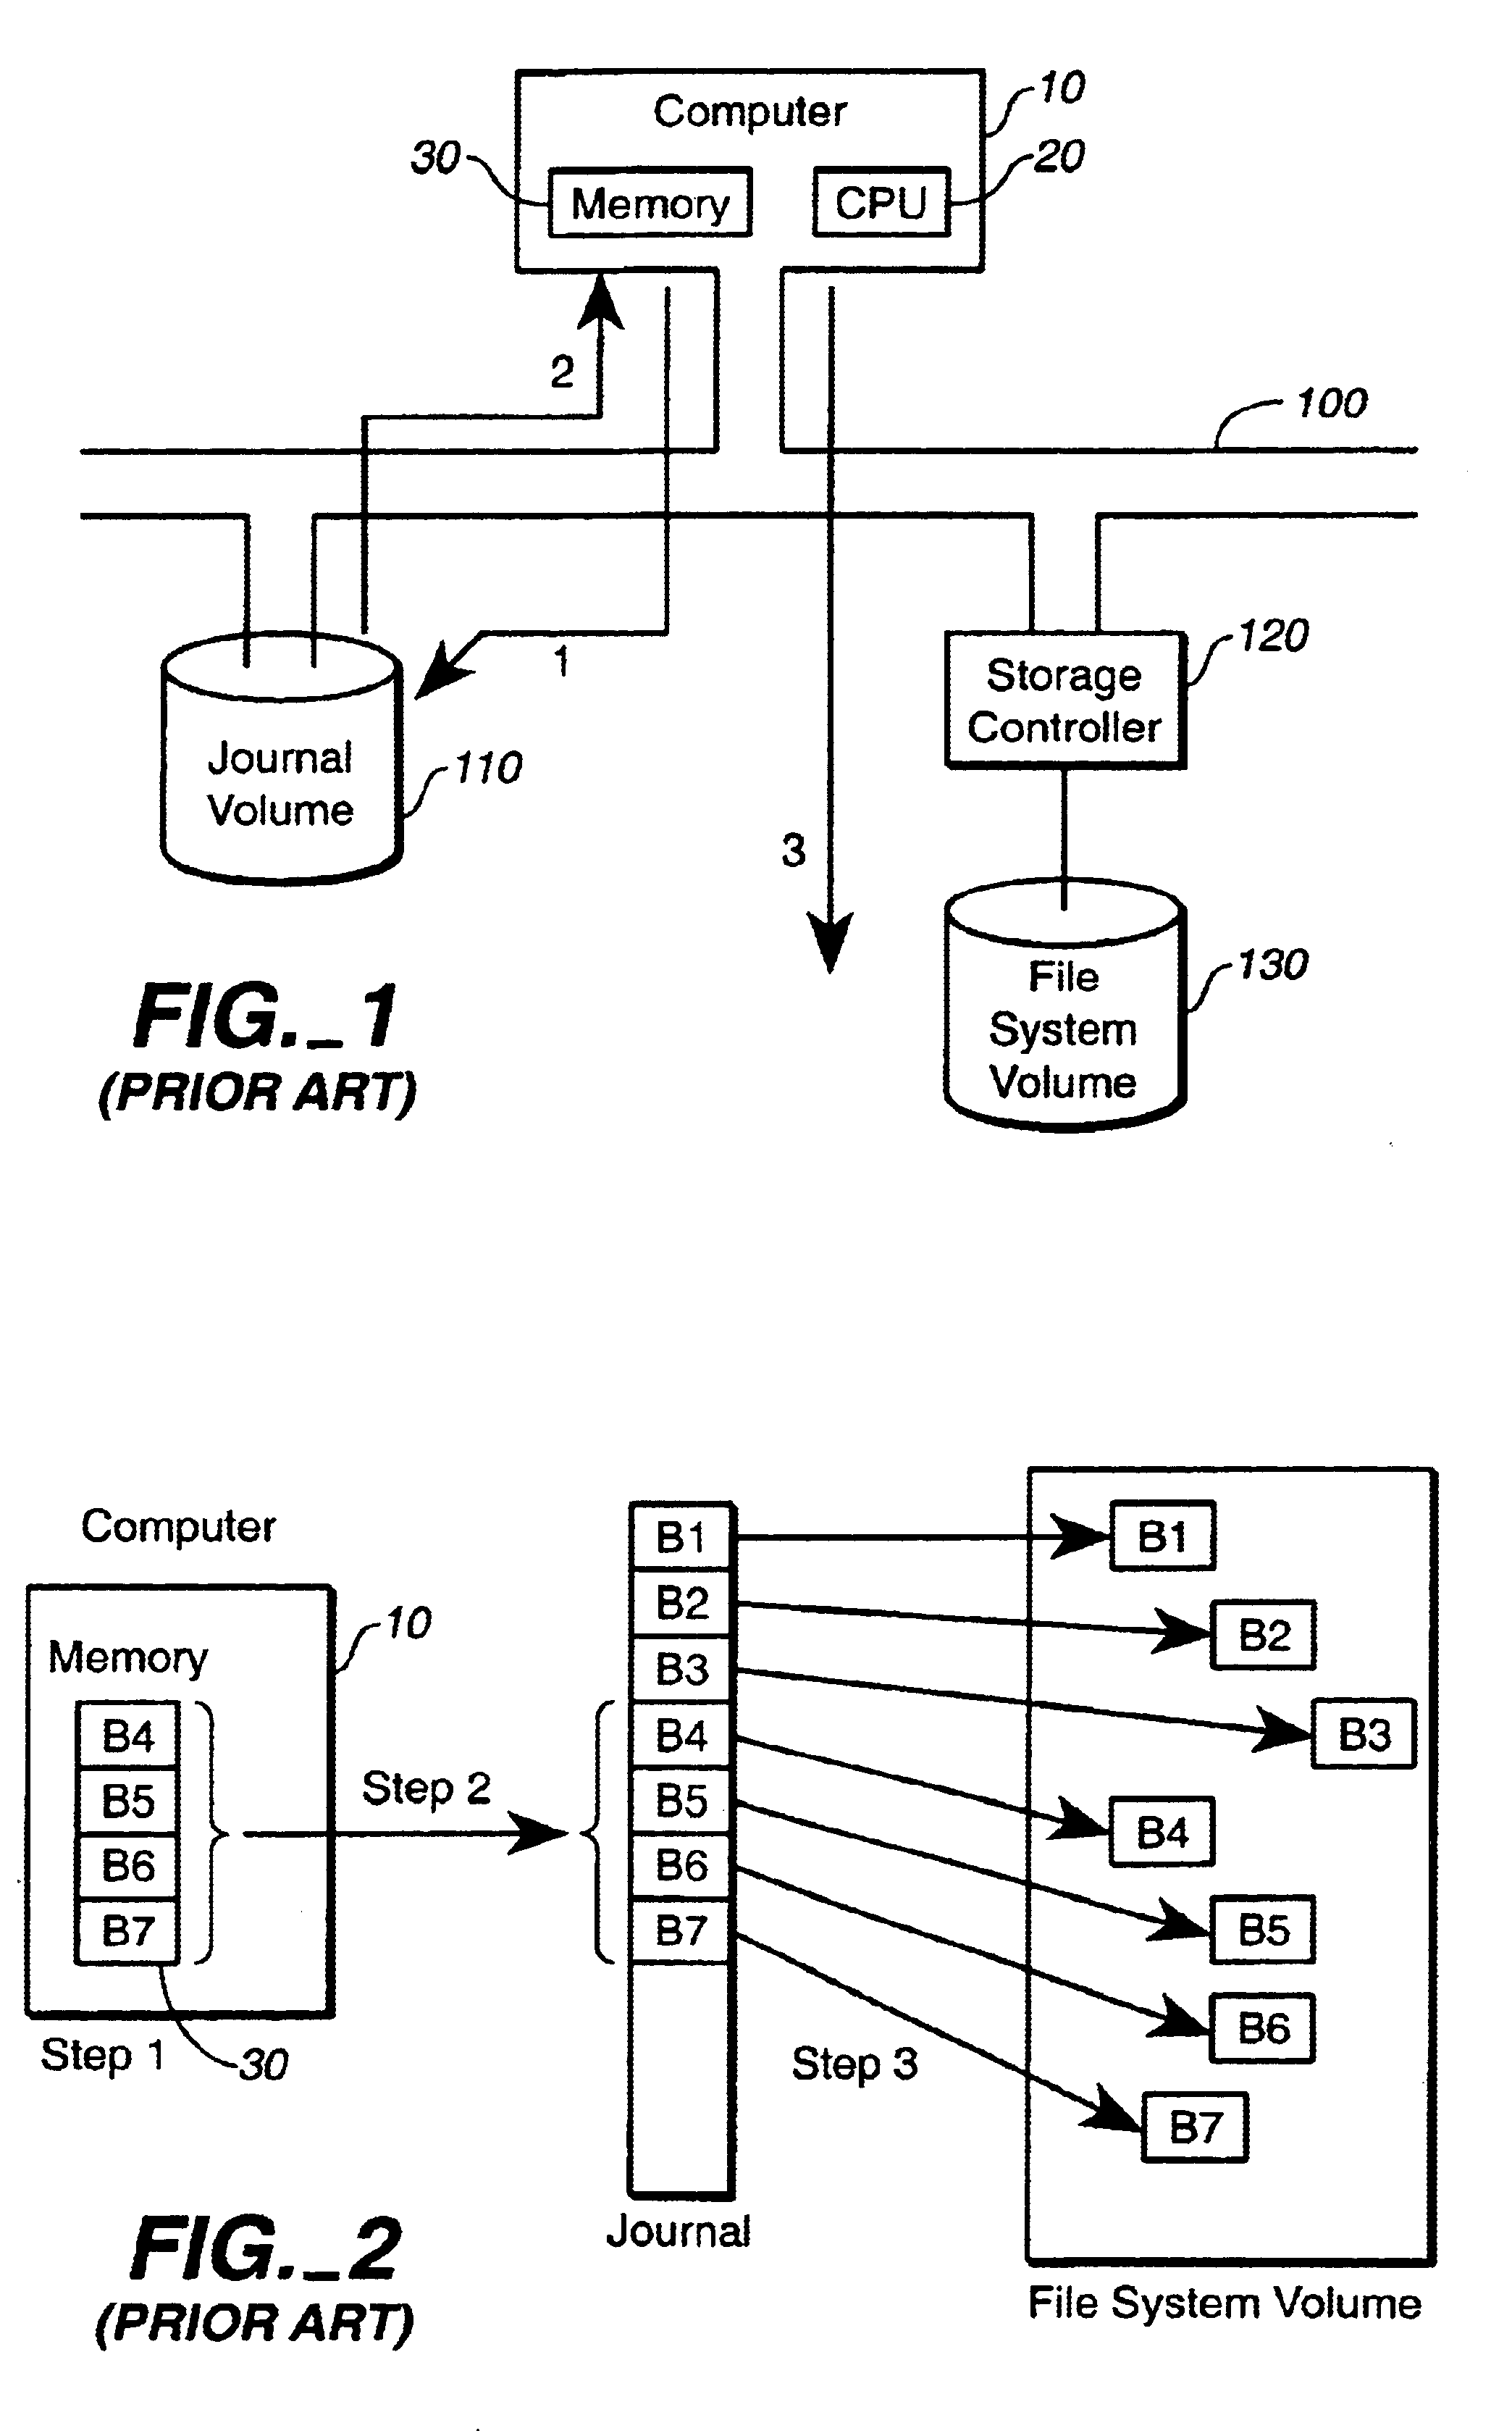 Method for the acceleration and simplification of file system logging techniques using storage device snapshots